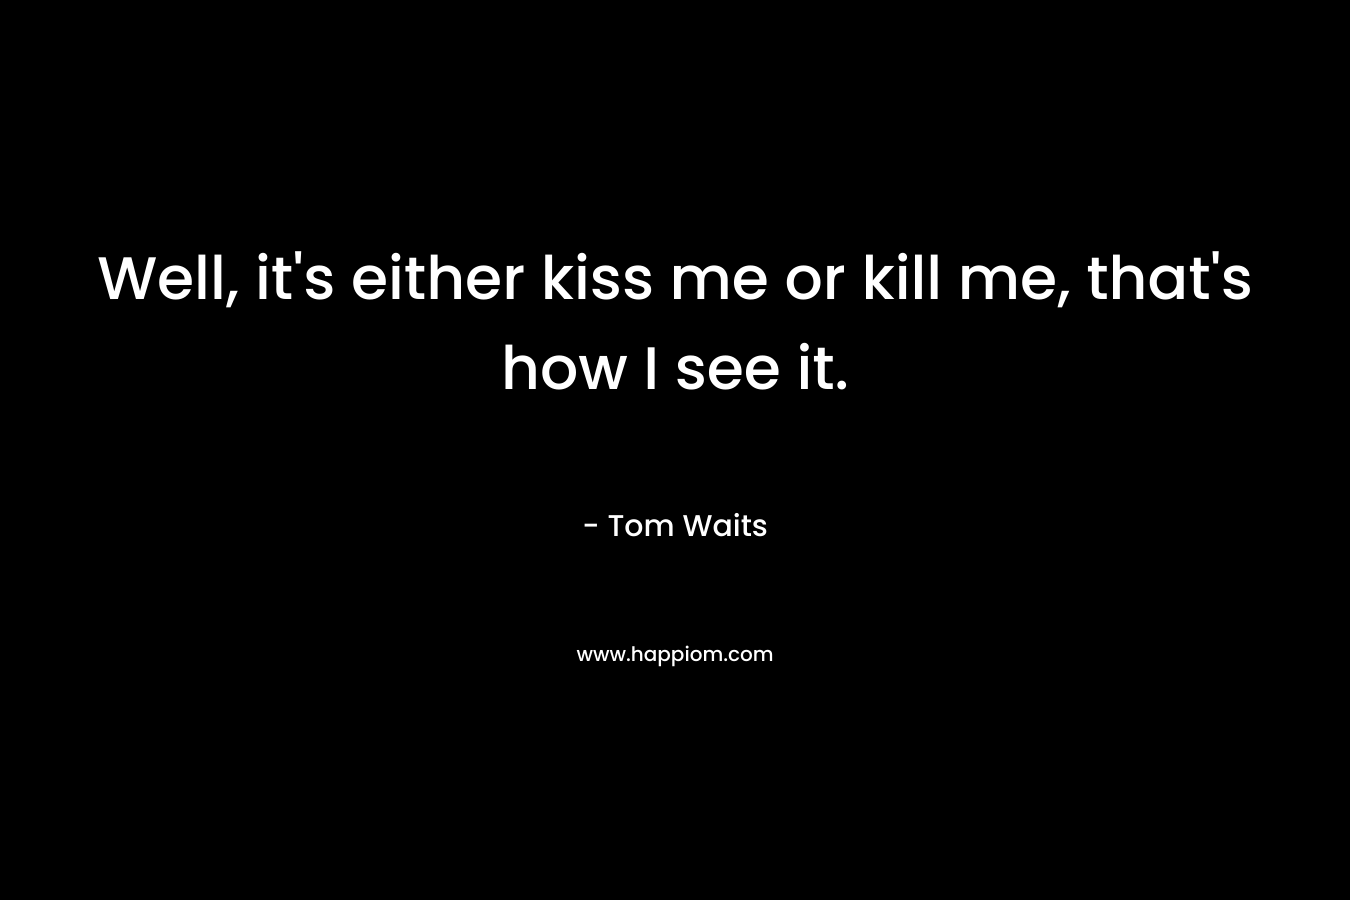 Well, it’s either kiss me or kill me, that’s how I see it. – Tom Waits